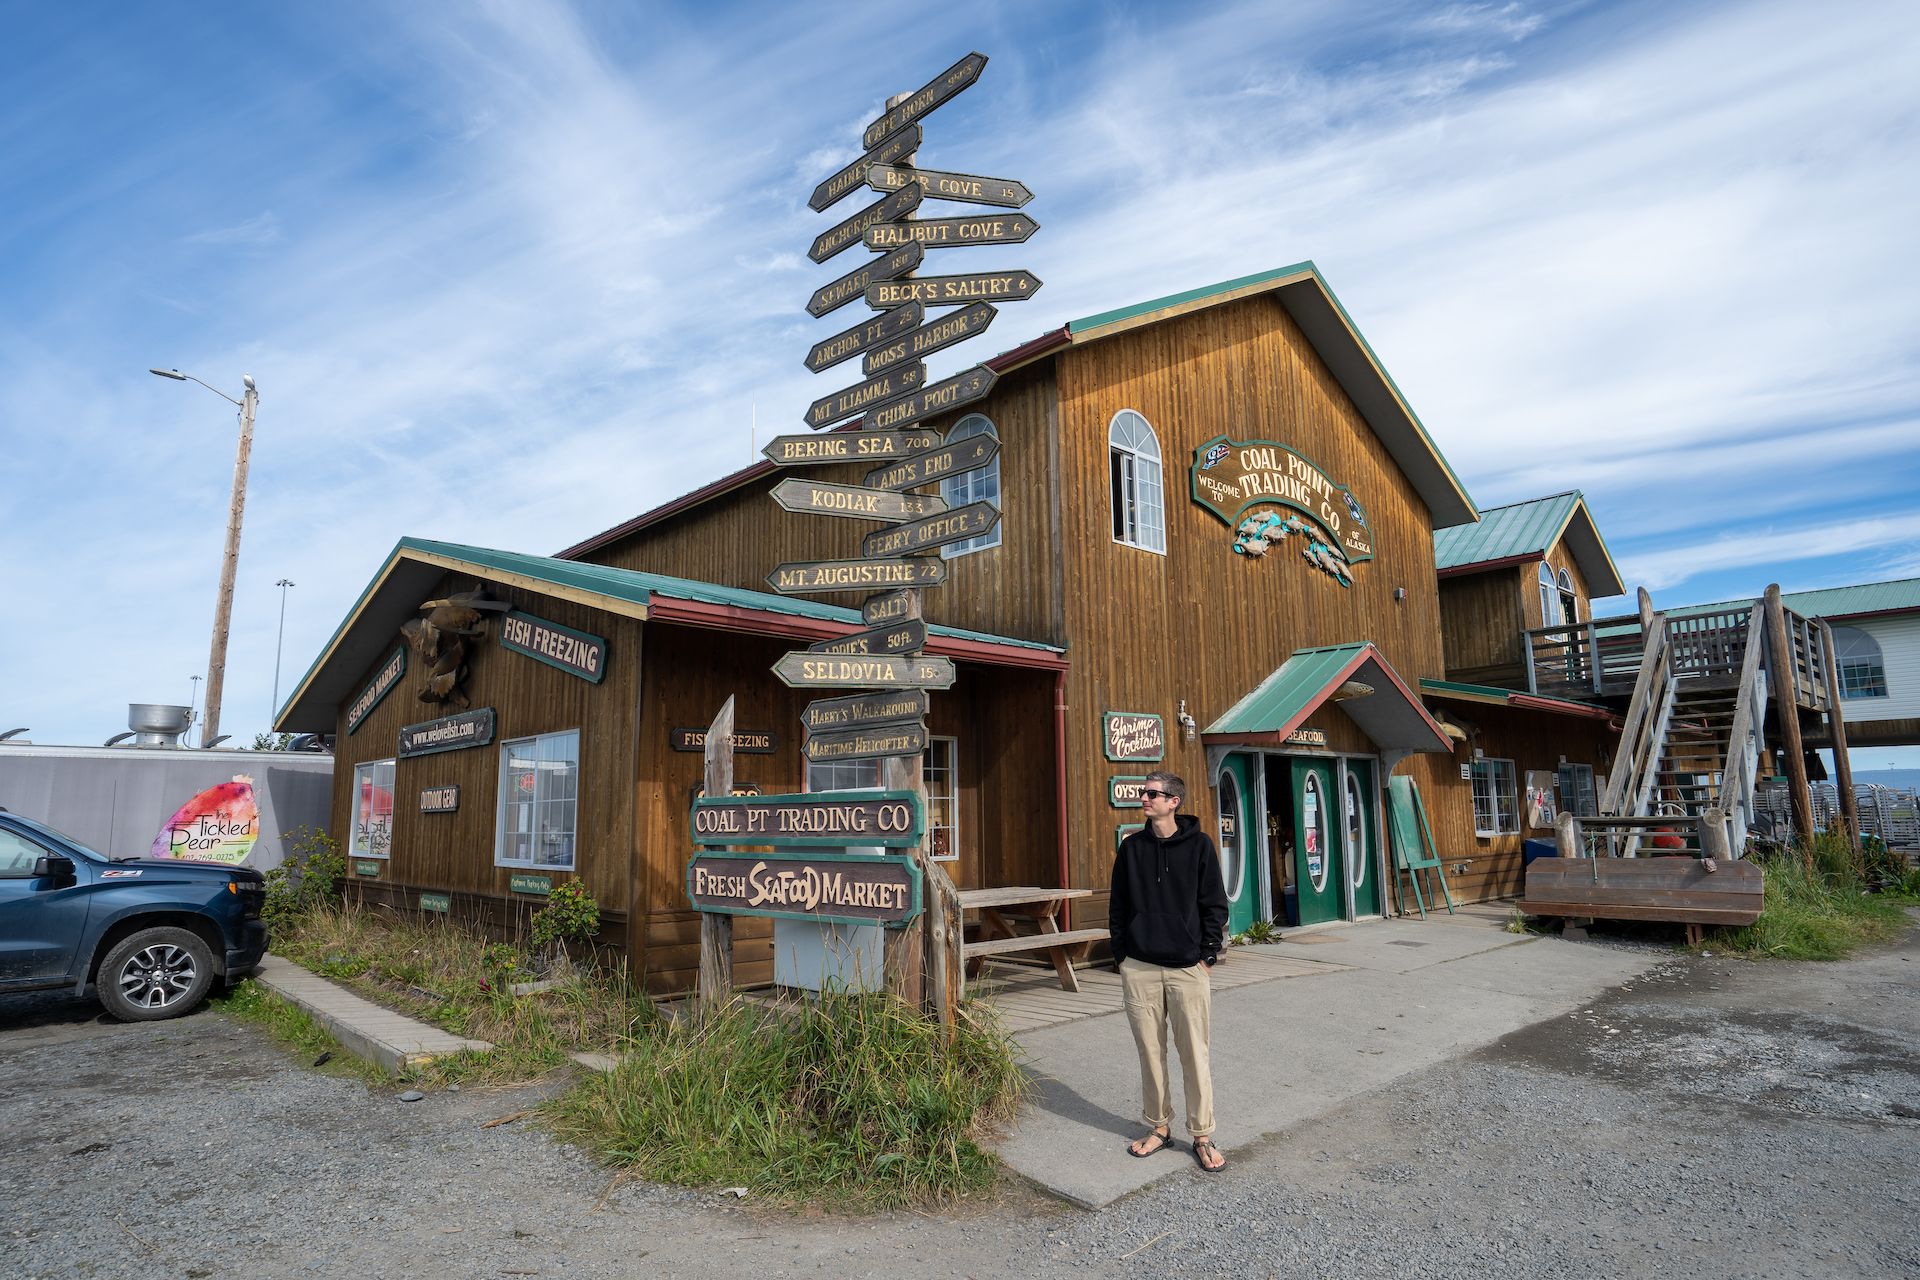 We also walked around the famous “Homer Spit” - a 4.5-mile-long peninsula, formed by a terminal moraine 15,000 years ago, that extends Homer into the Kachemak Bay. The strech of land is mostly filled with souvenir shops.